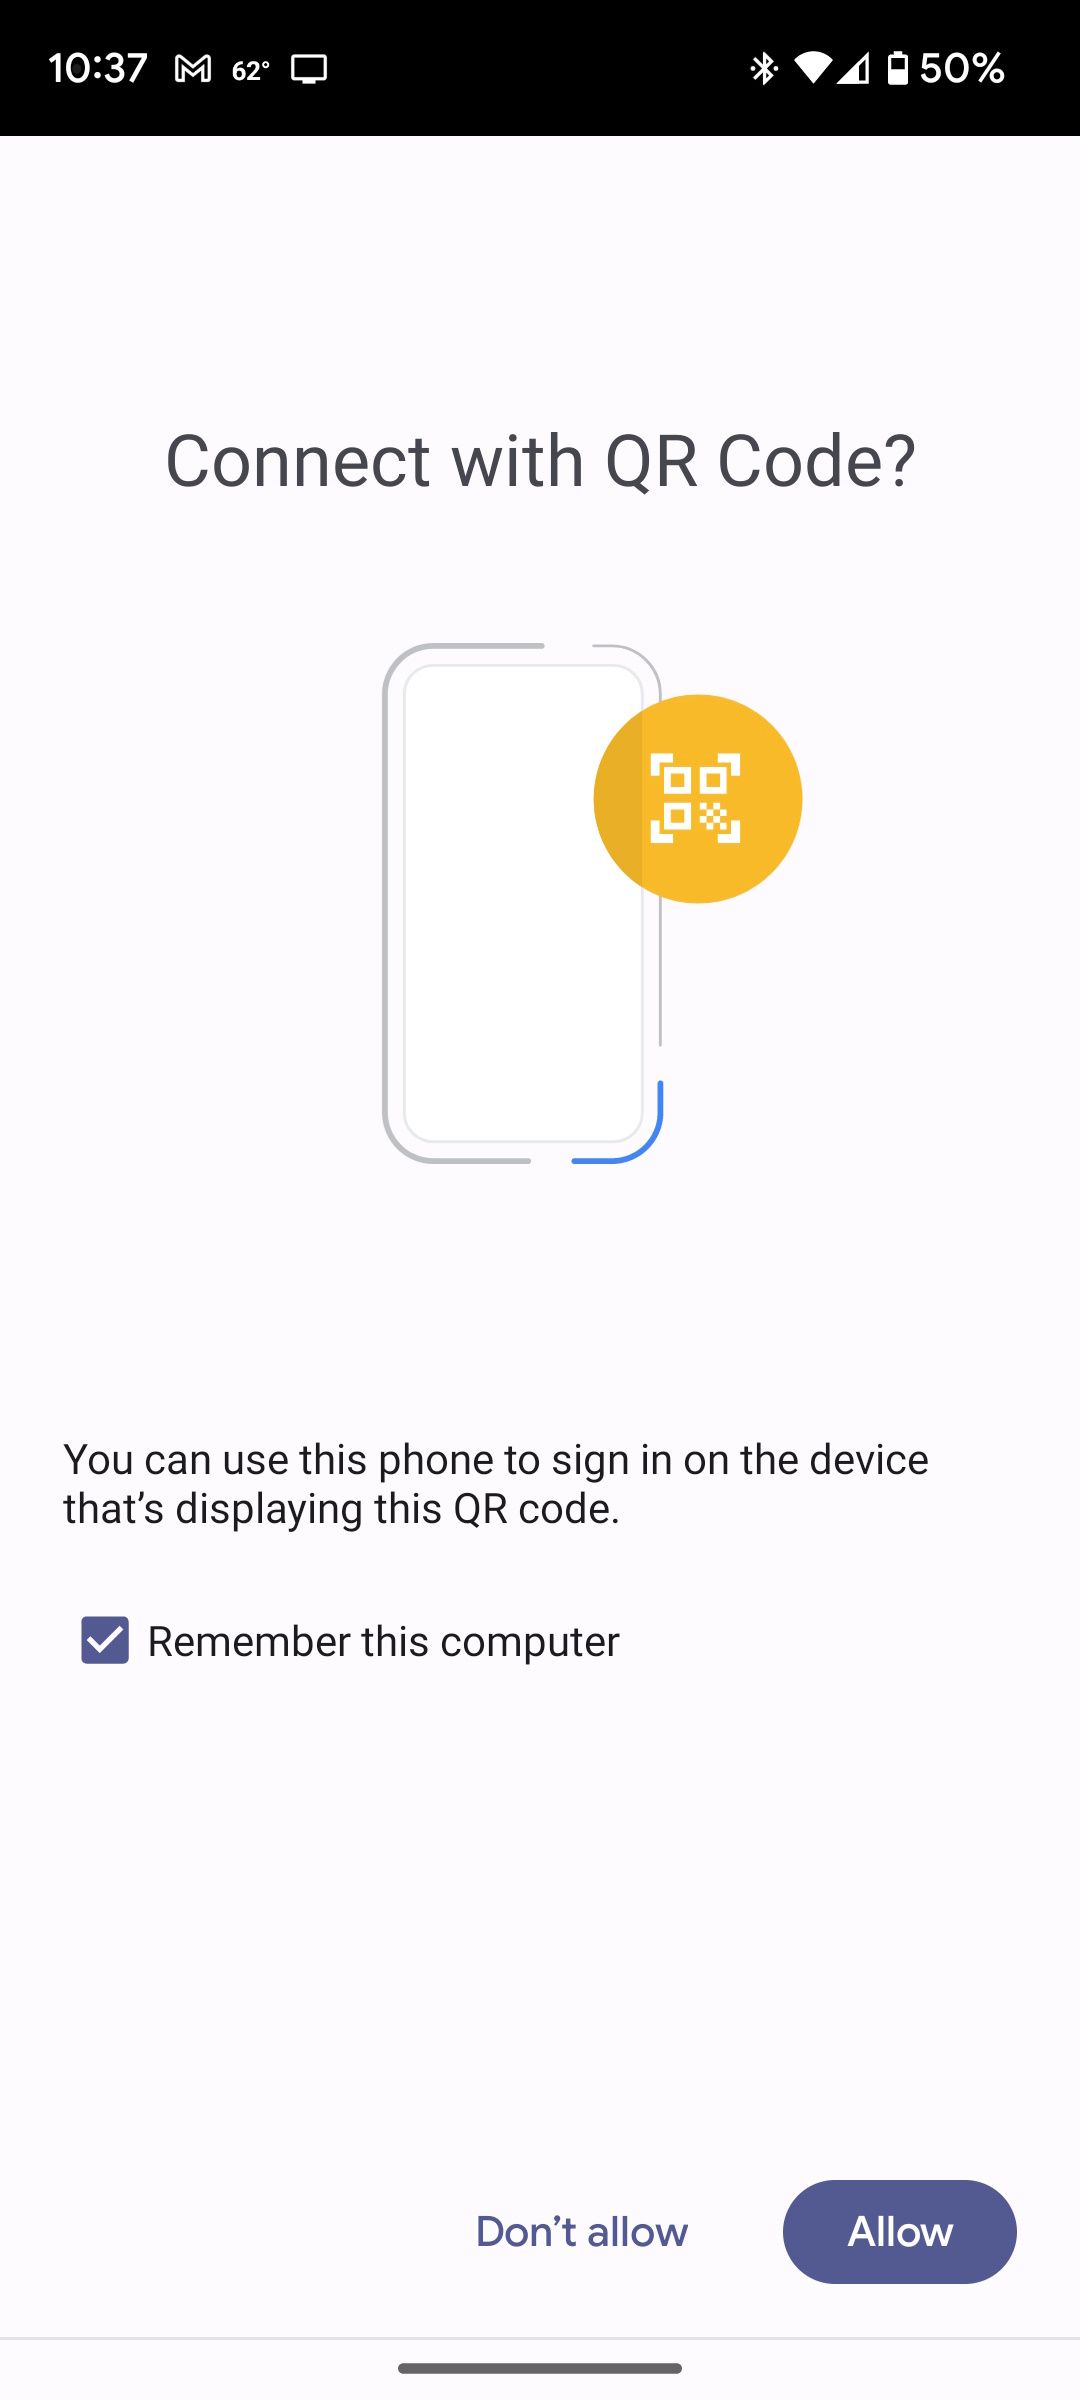 The Connect With QR Code option when confirming a passkey for a Google account